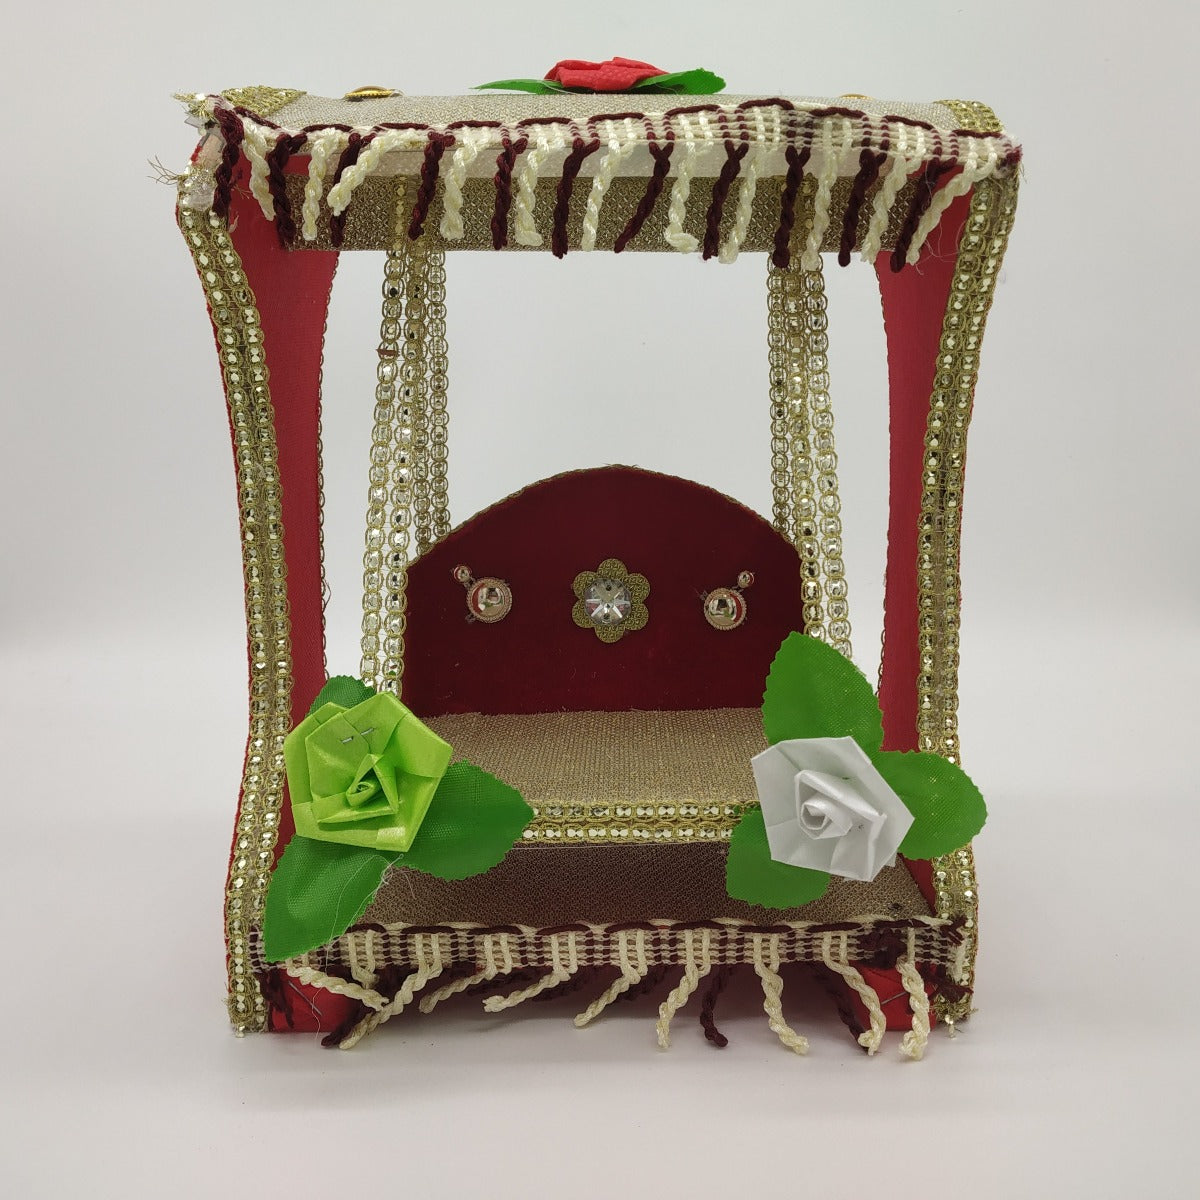 Wooden Jhula With Lace & Flower Decoration For Laddu Gopal